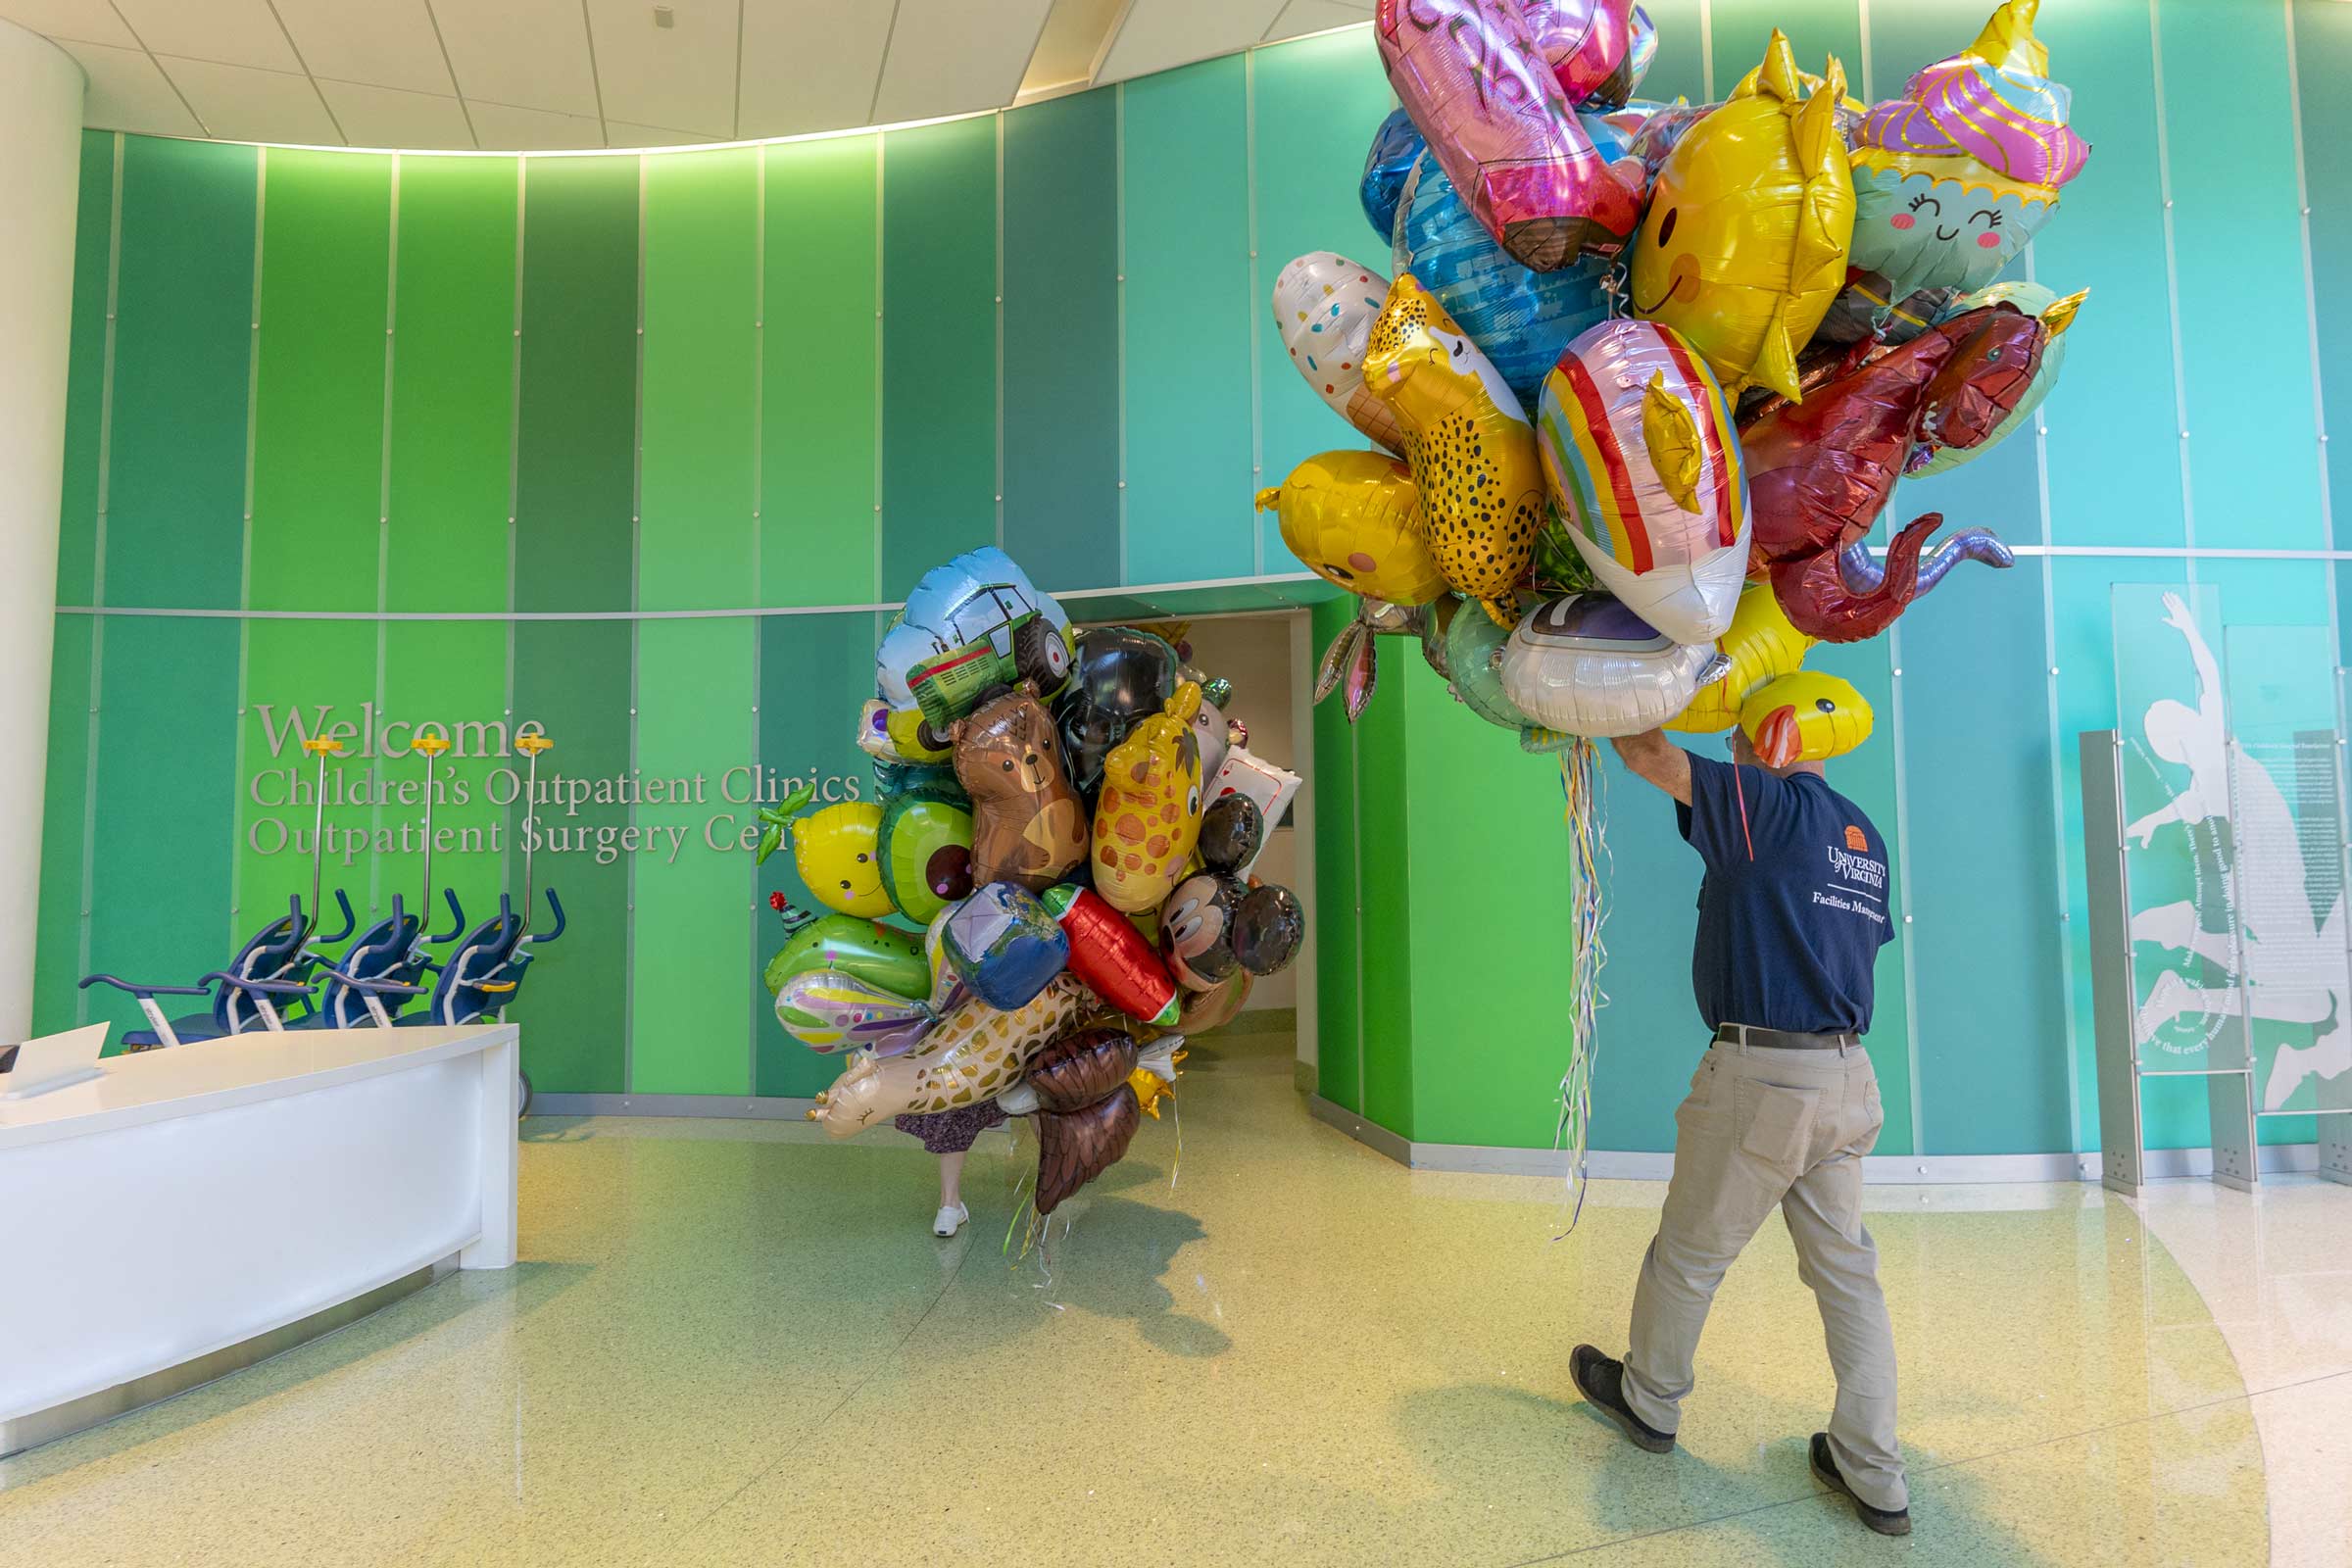 Workers carry the balloons into the brightly painted Battle Building. 